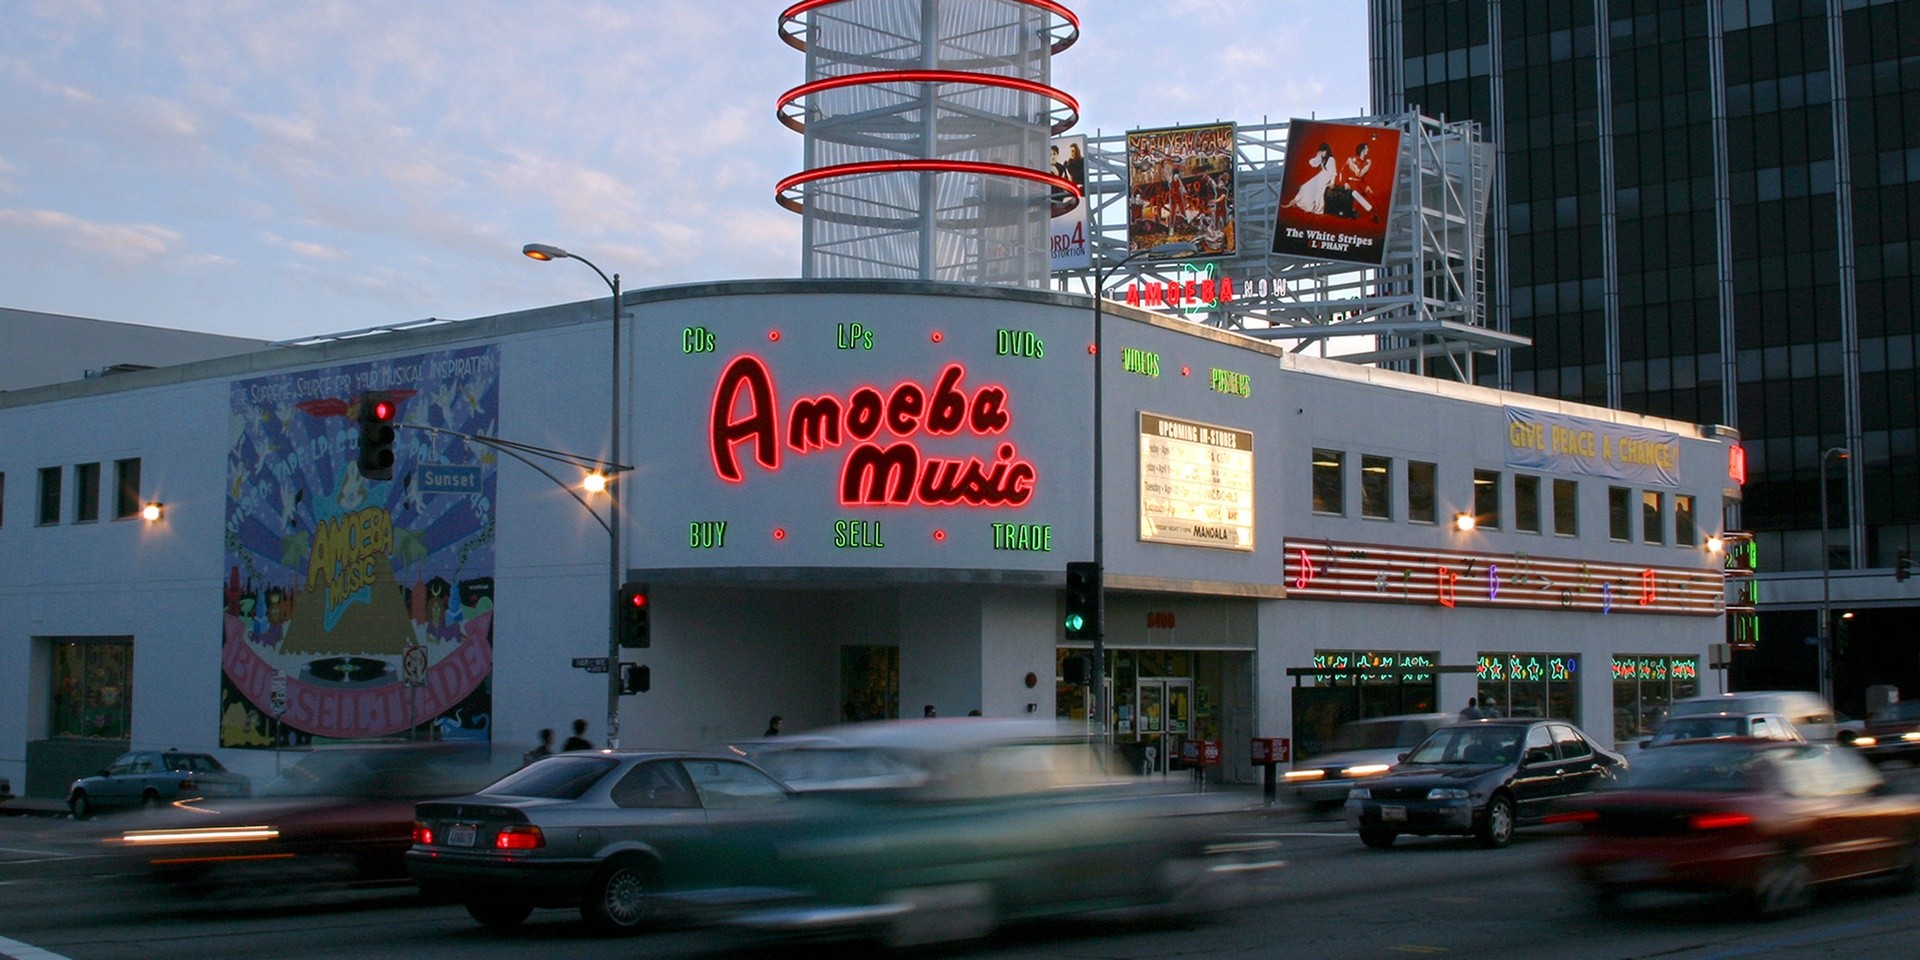 WATCH: Take a tour through one of the world's biggest music stores, Amoeba Music